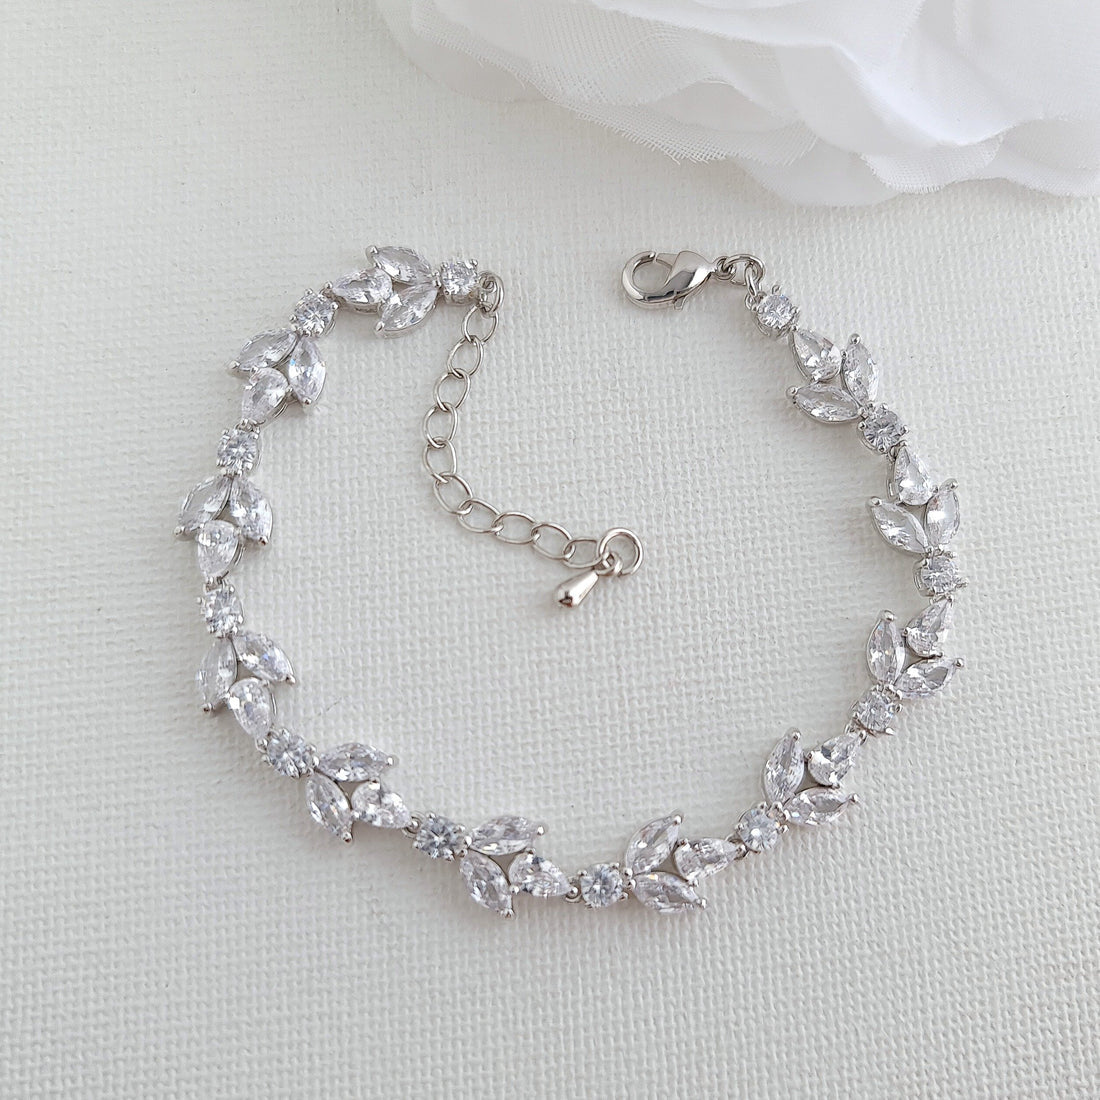 PoetryDesigns Sparkling Dainty Wedding Jewelry Set; Earrings, Necklace, Bracelet Silver / 16 Necklace / Earrings + Necklace + Bracelet